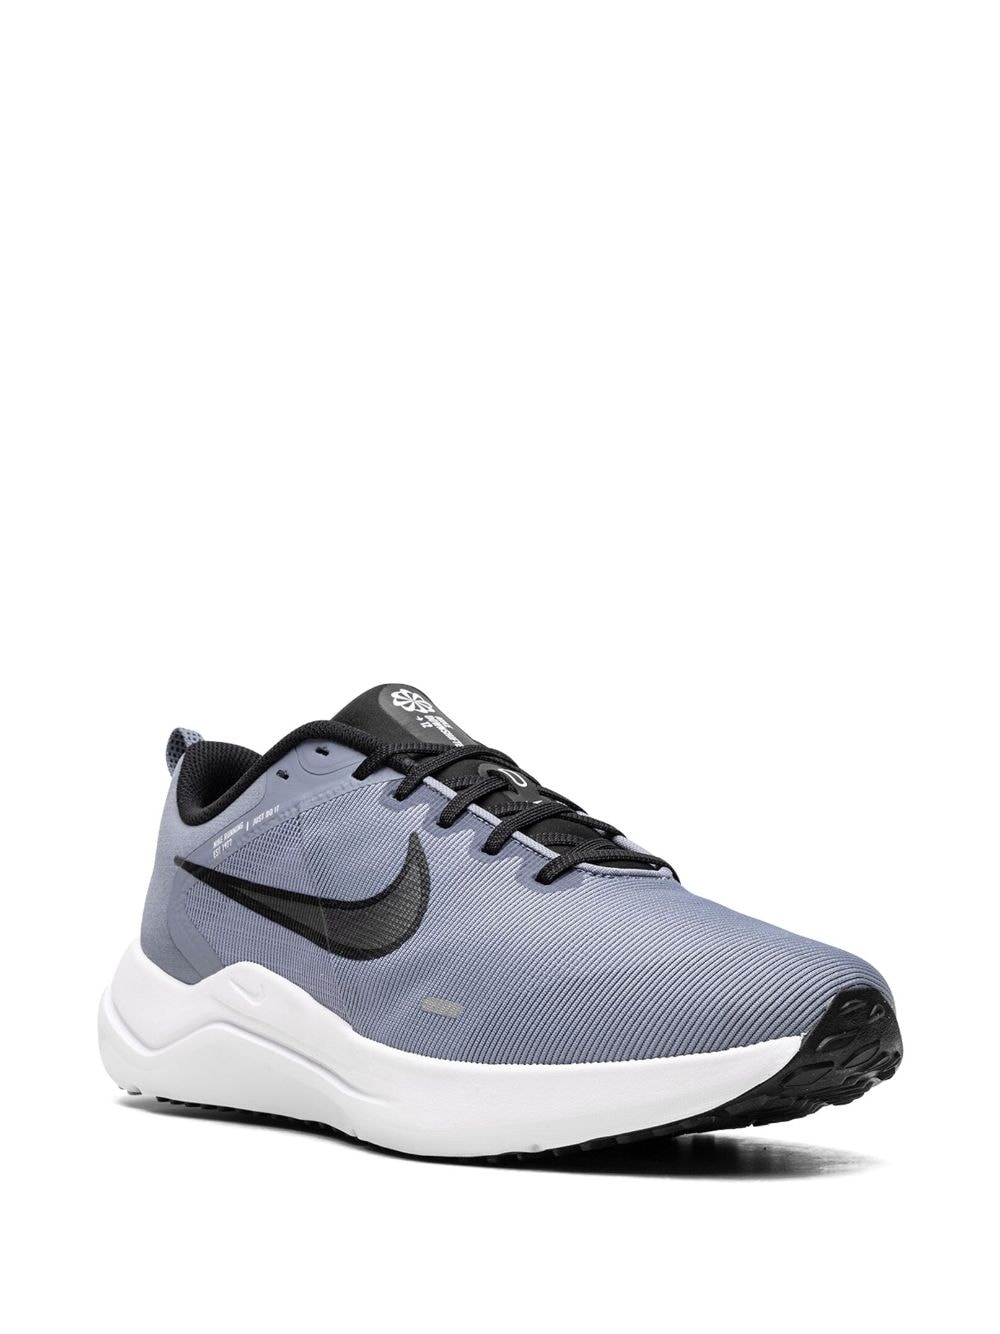 Image 2 of Nike Downshifter 12 4E "Blue" sneakers